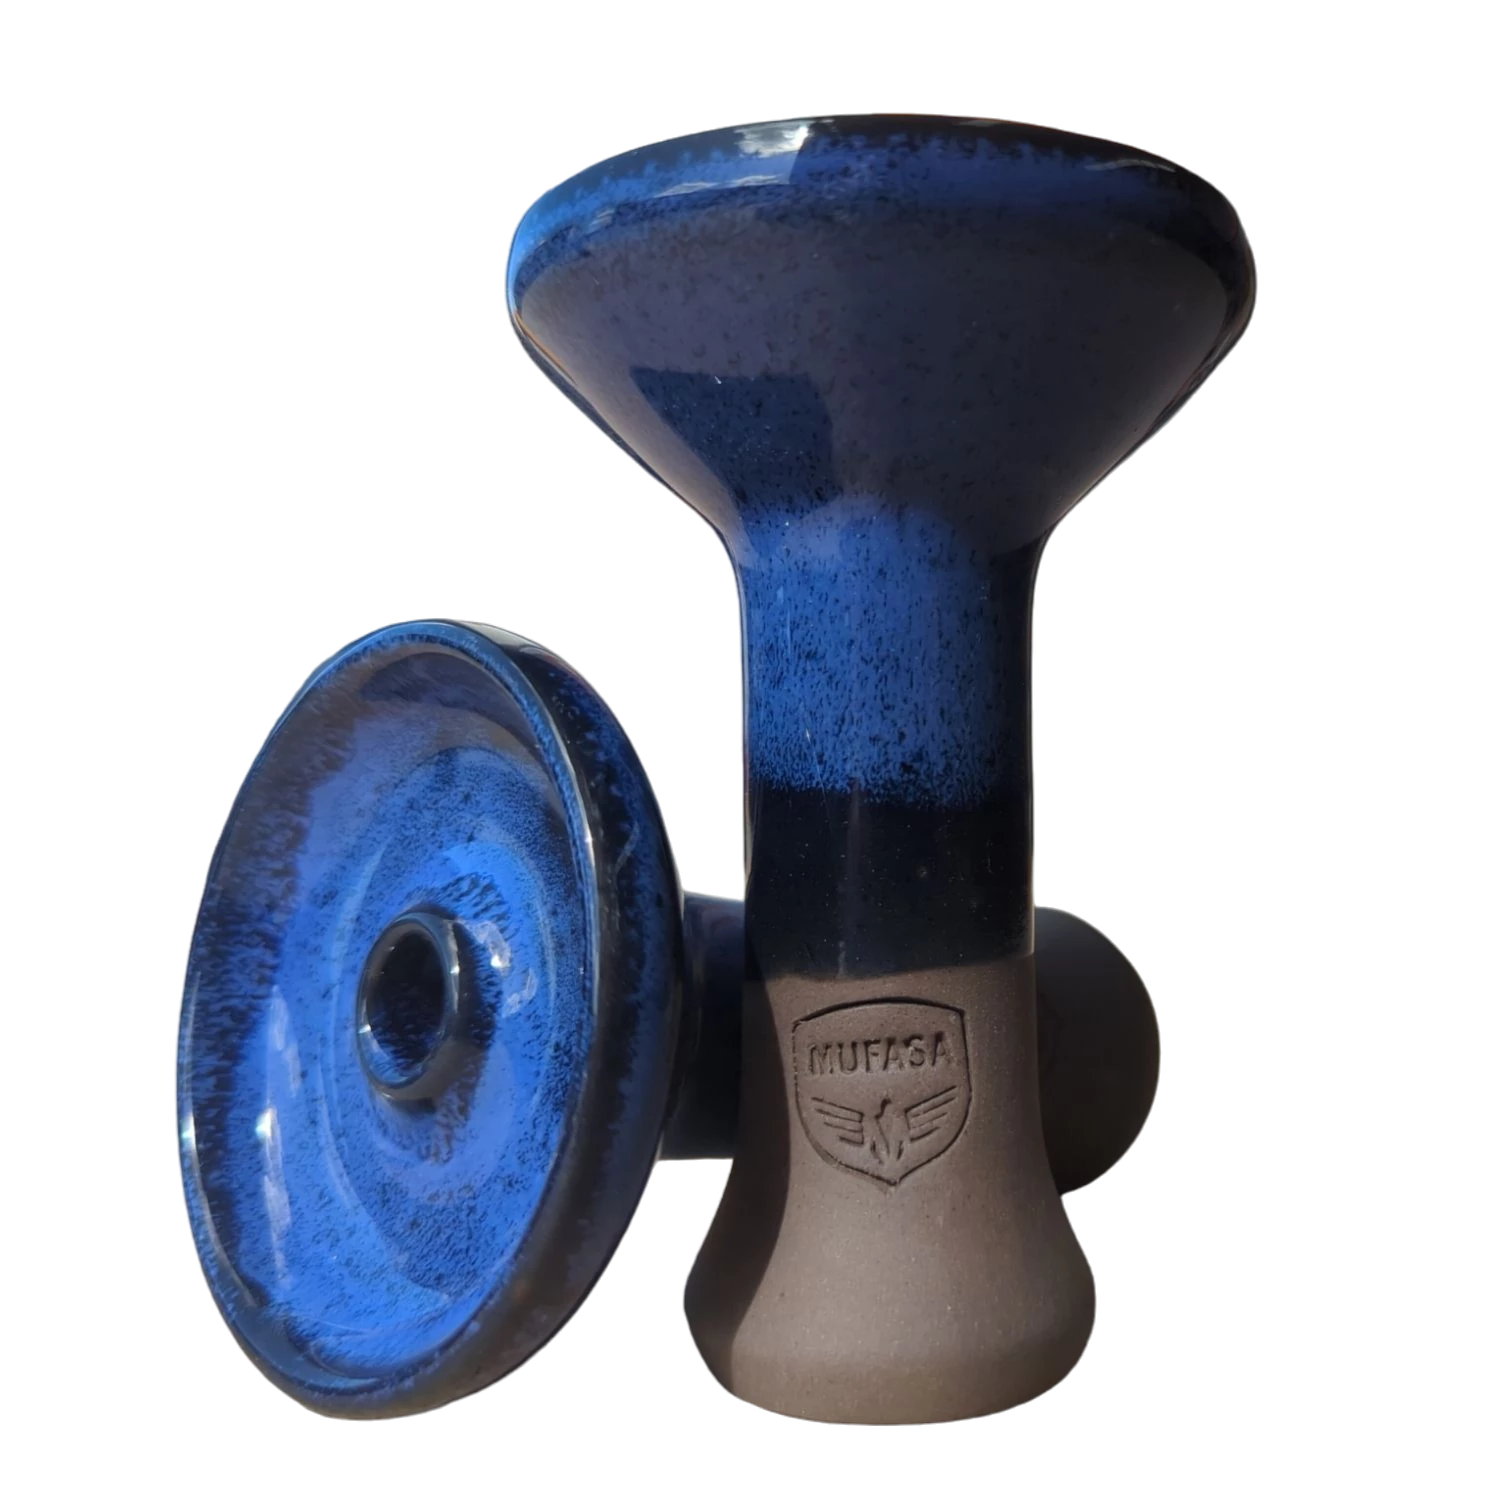 mufasa premium clay phunnel hookah bowl set with hmd heat management device aluminium fits all types of hookah set one choice light line two blue